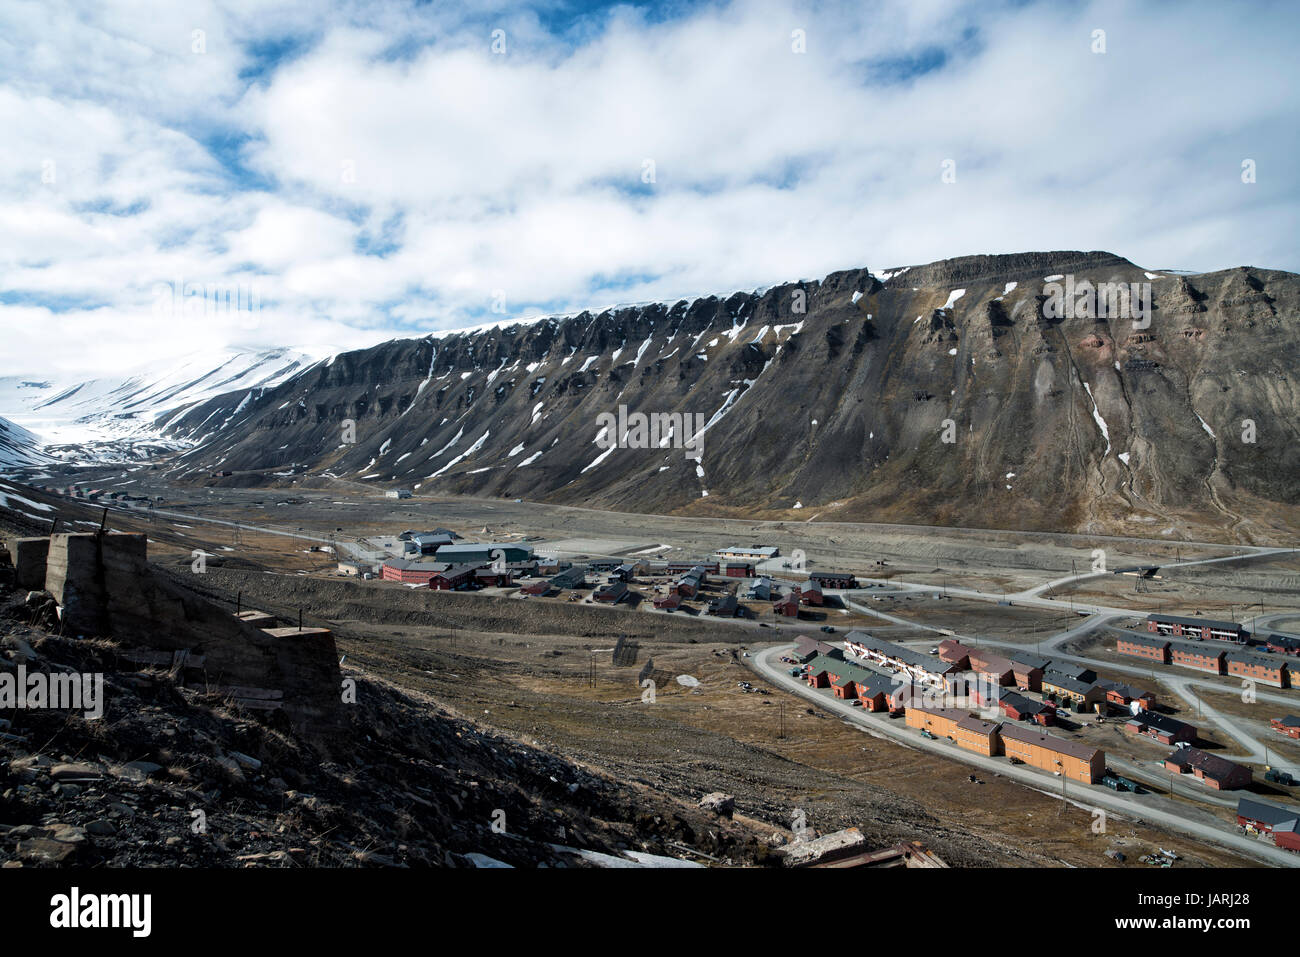 Panoramic view of Longyearbyen and Platåberget. Blick auf Longyearbyen und Platåberget. Stock Photo